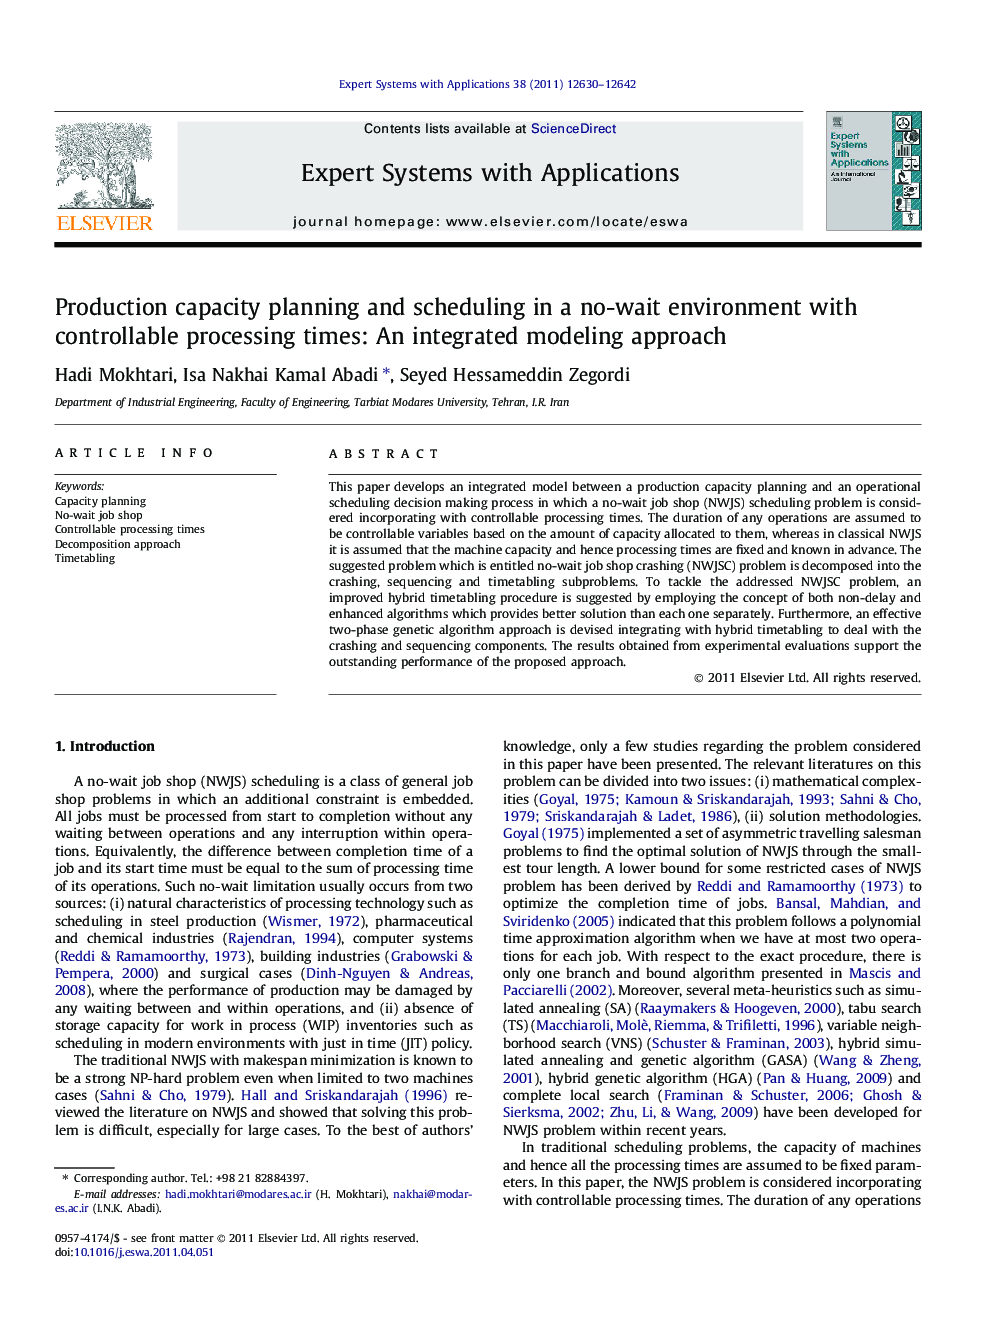 Production capacity planning and scheduling in a no-wait environment with controllable processing times: An integrated modeling approach